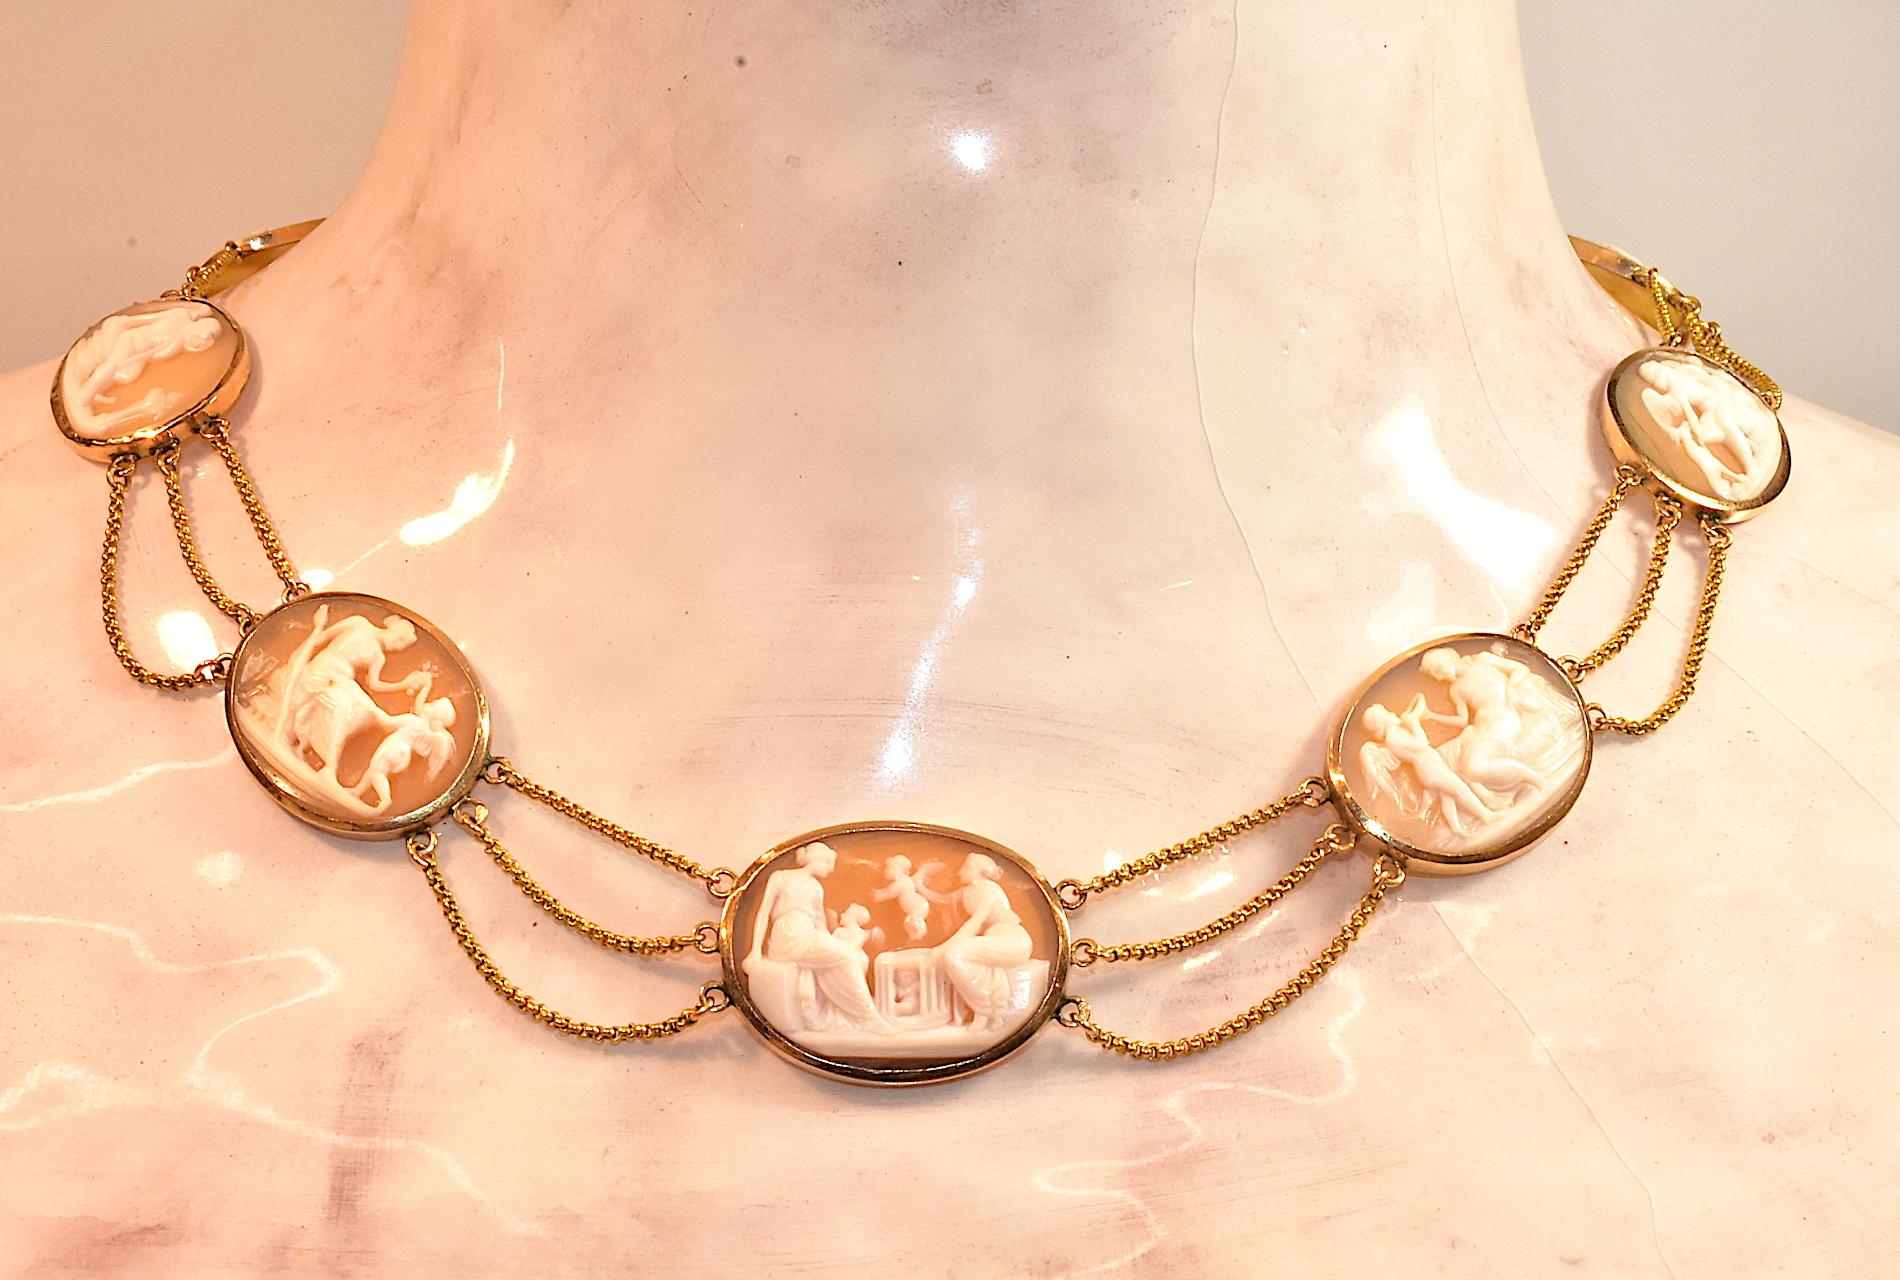 Antique 18K neoclassical carved shell cameo necklace with ten graduated bezel-set cameos each depicting a different mythological scene. Each cameo plaque links to the next with triple swags of 18 carat festoon chain, in the style known as esclavage.